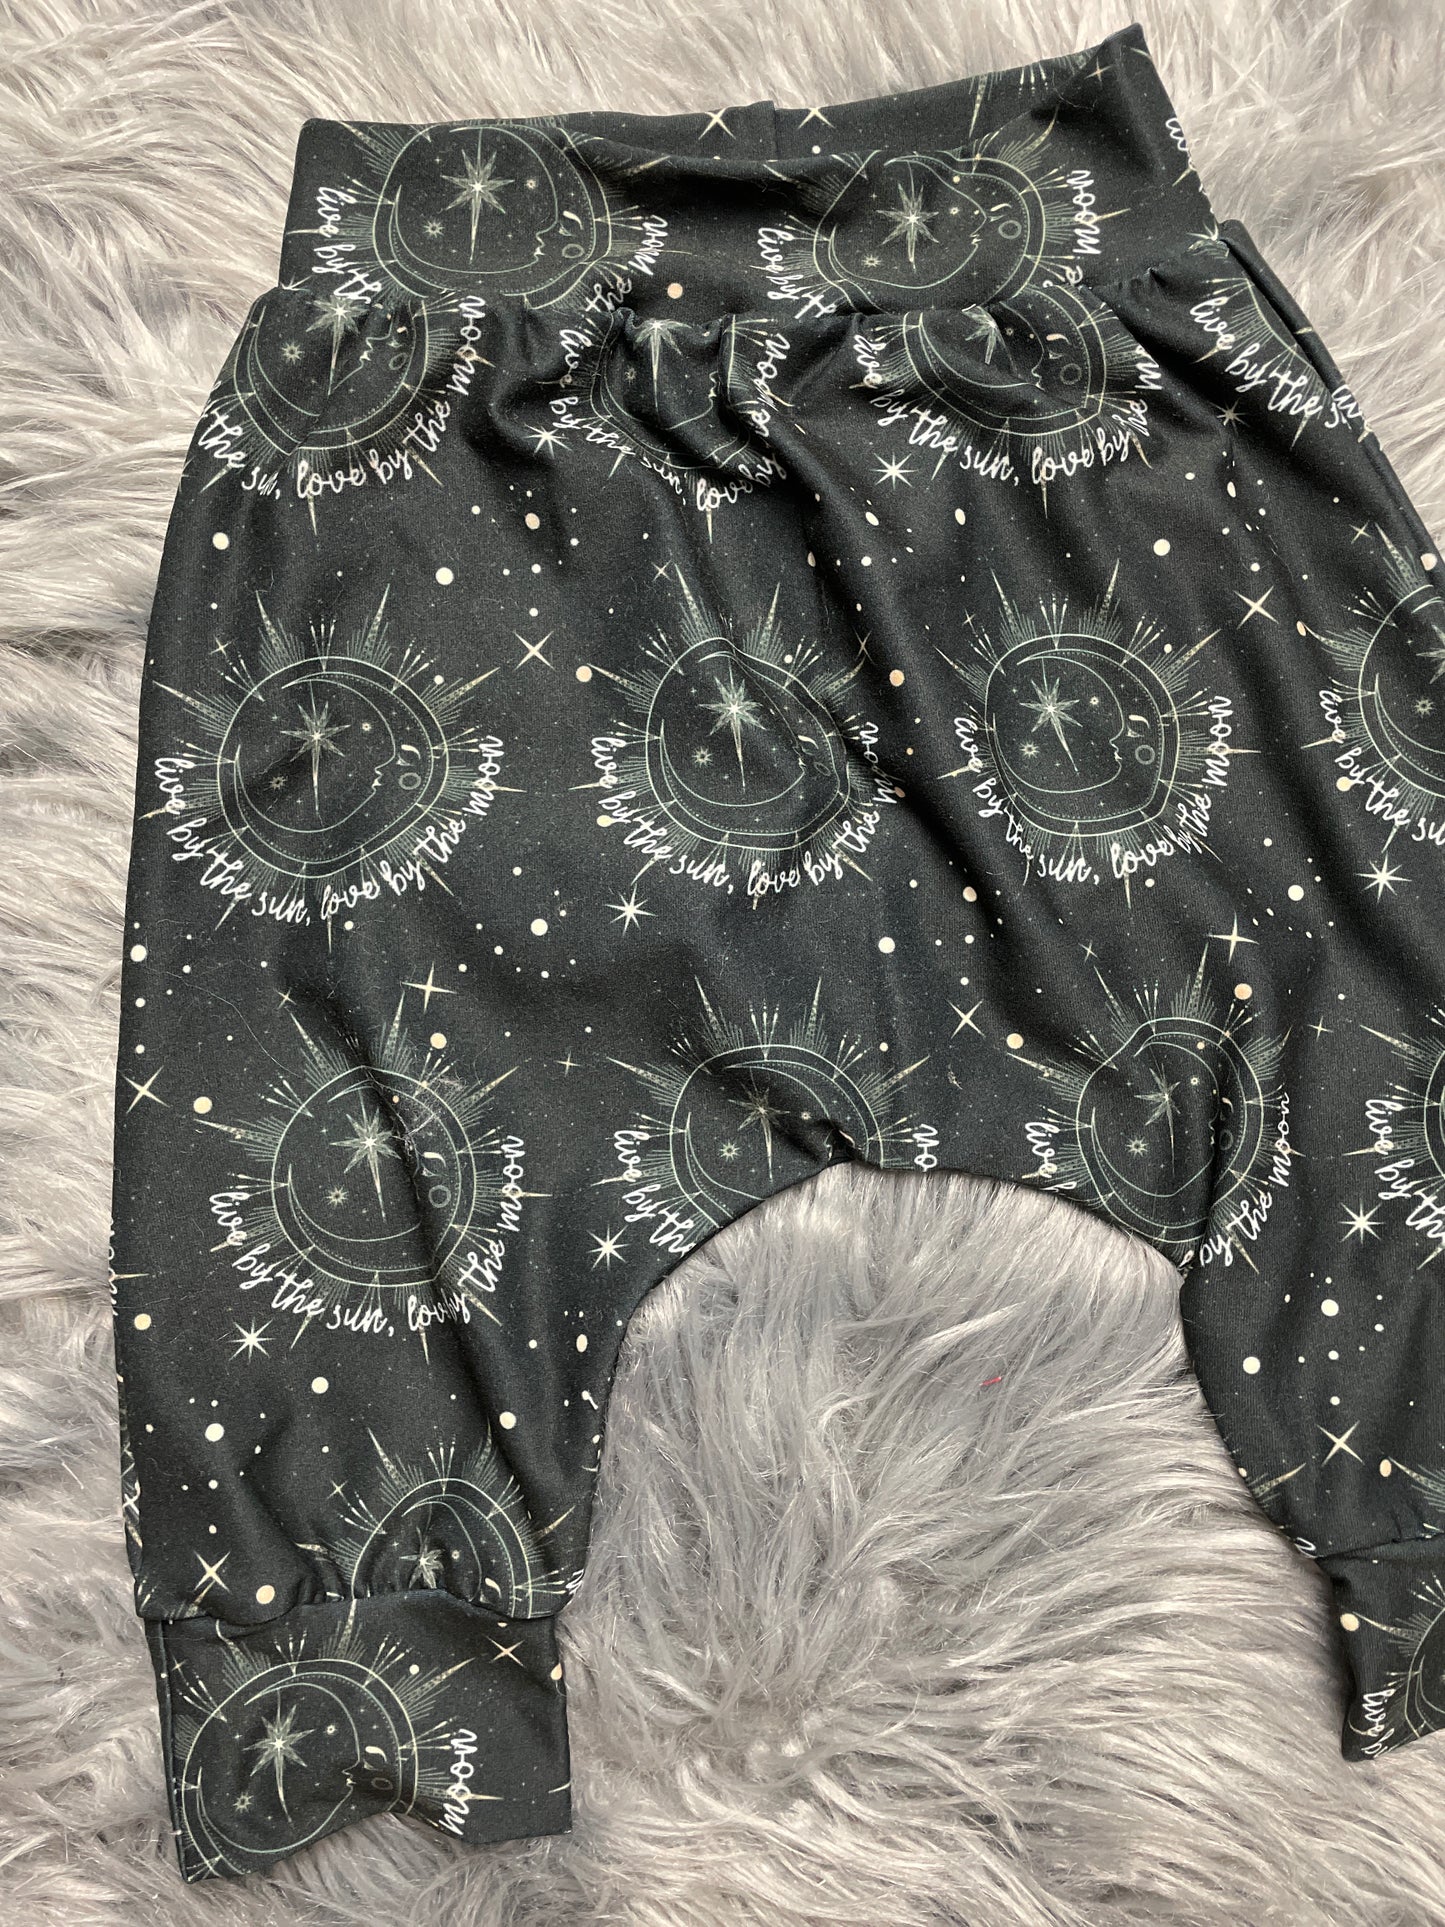 Live by the sun, love by the moon Joggers shorts size 3Y